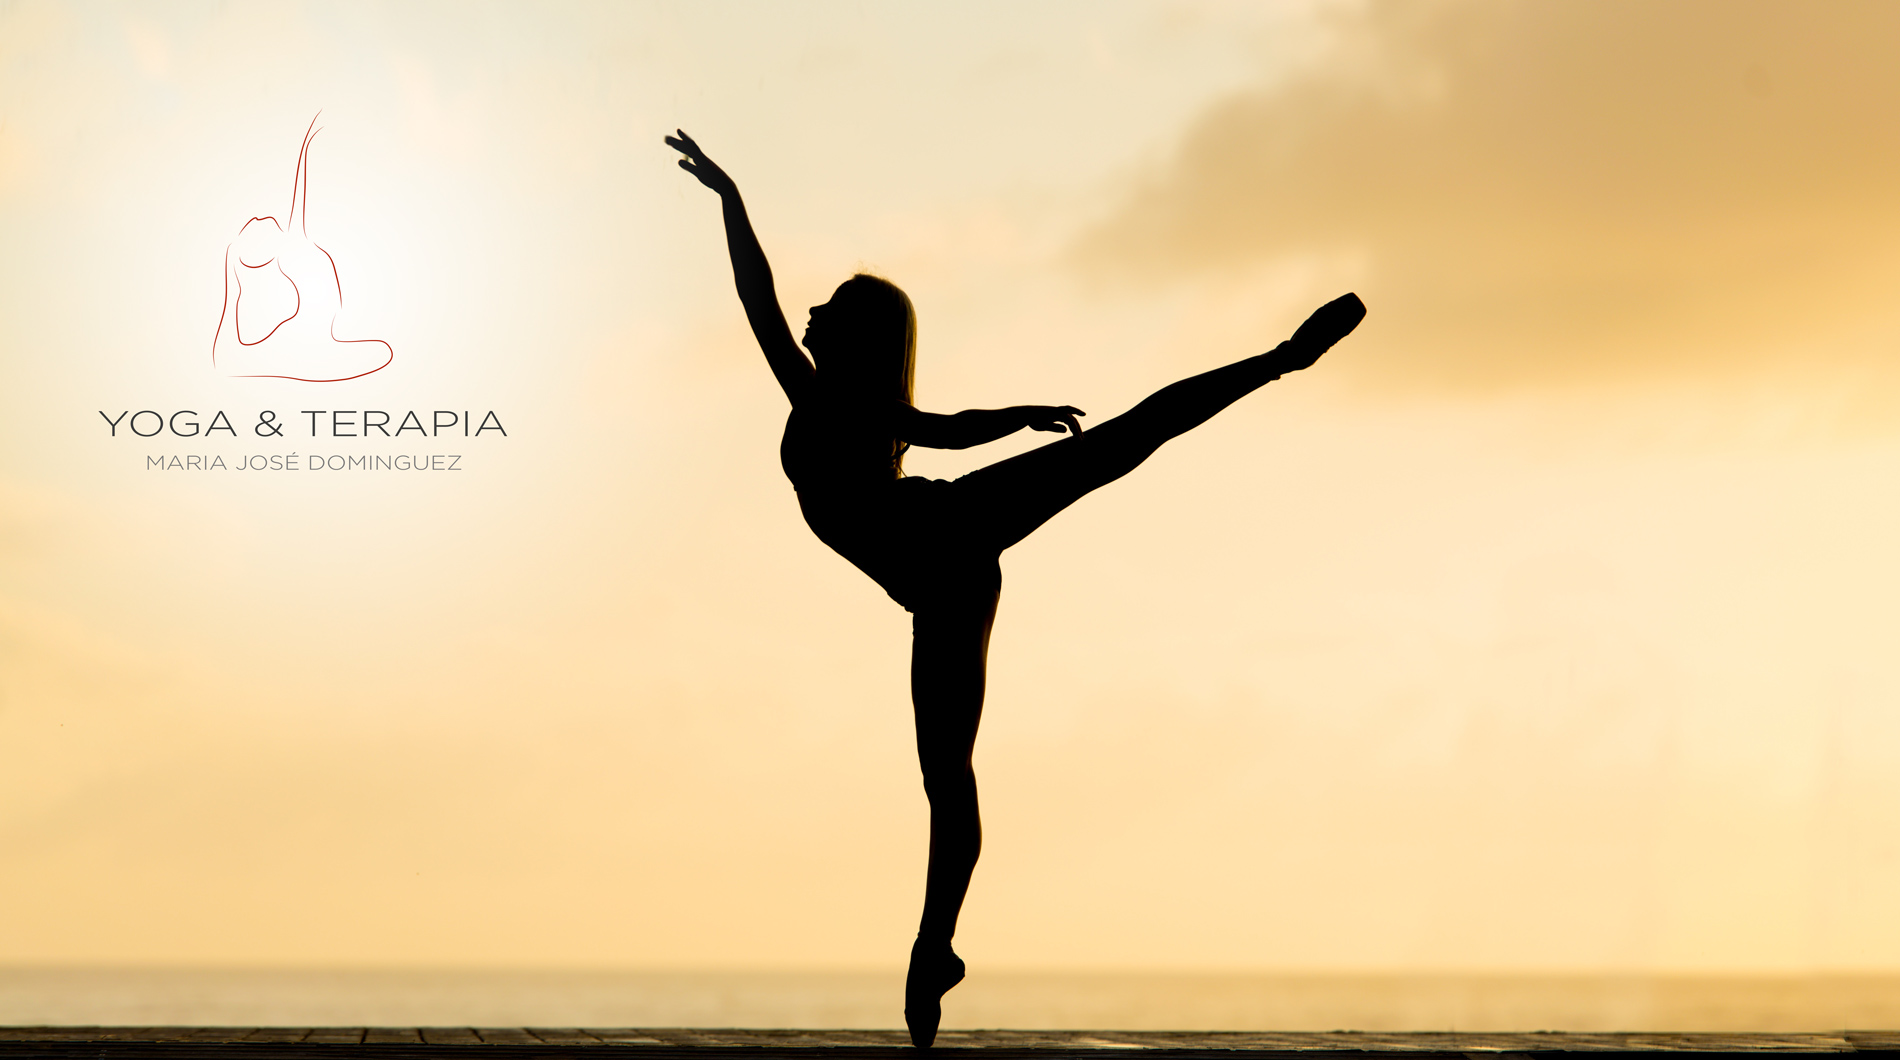 Portfolio of design works creating logos, brands, catalogs, and flyers for yoga and meditation centers